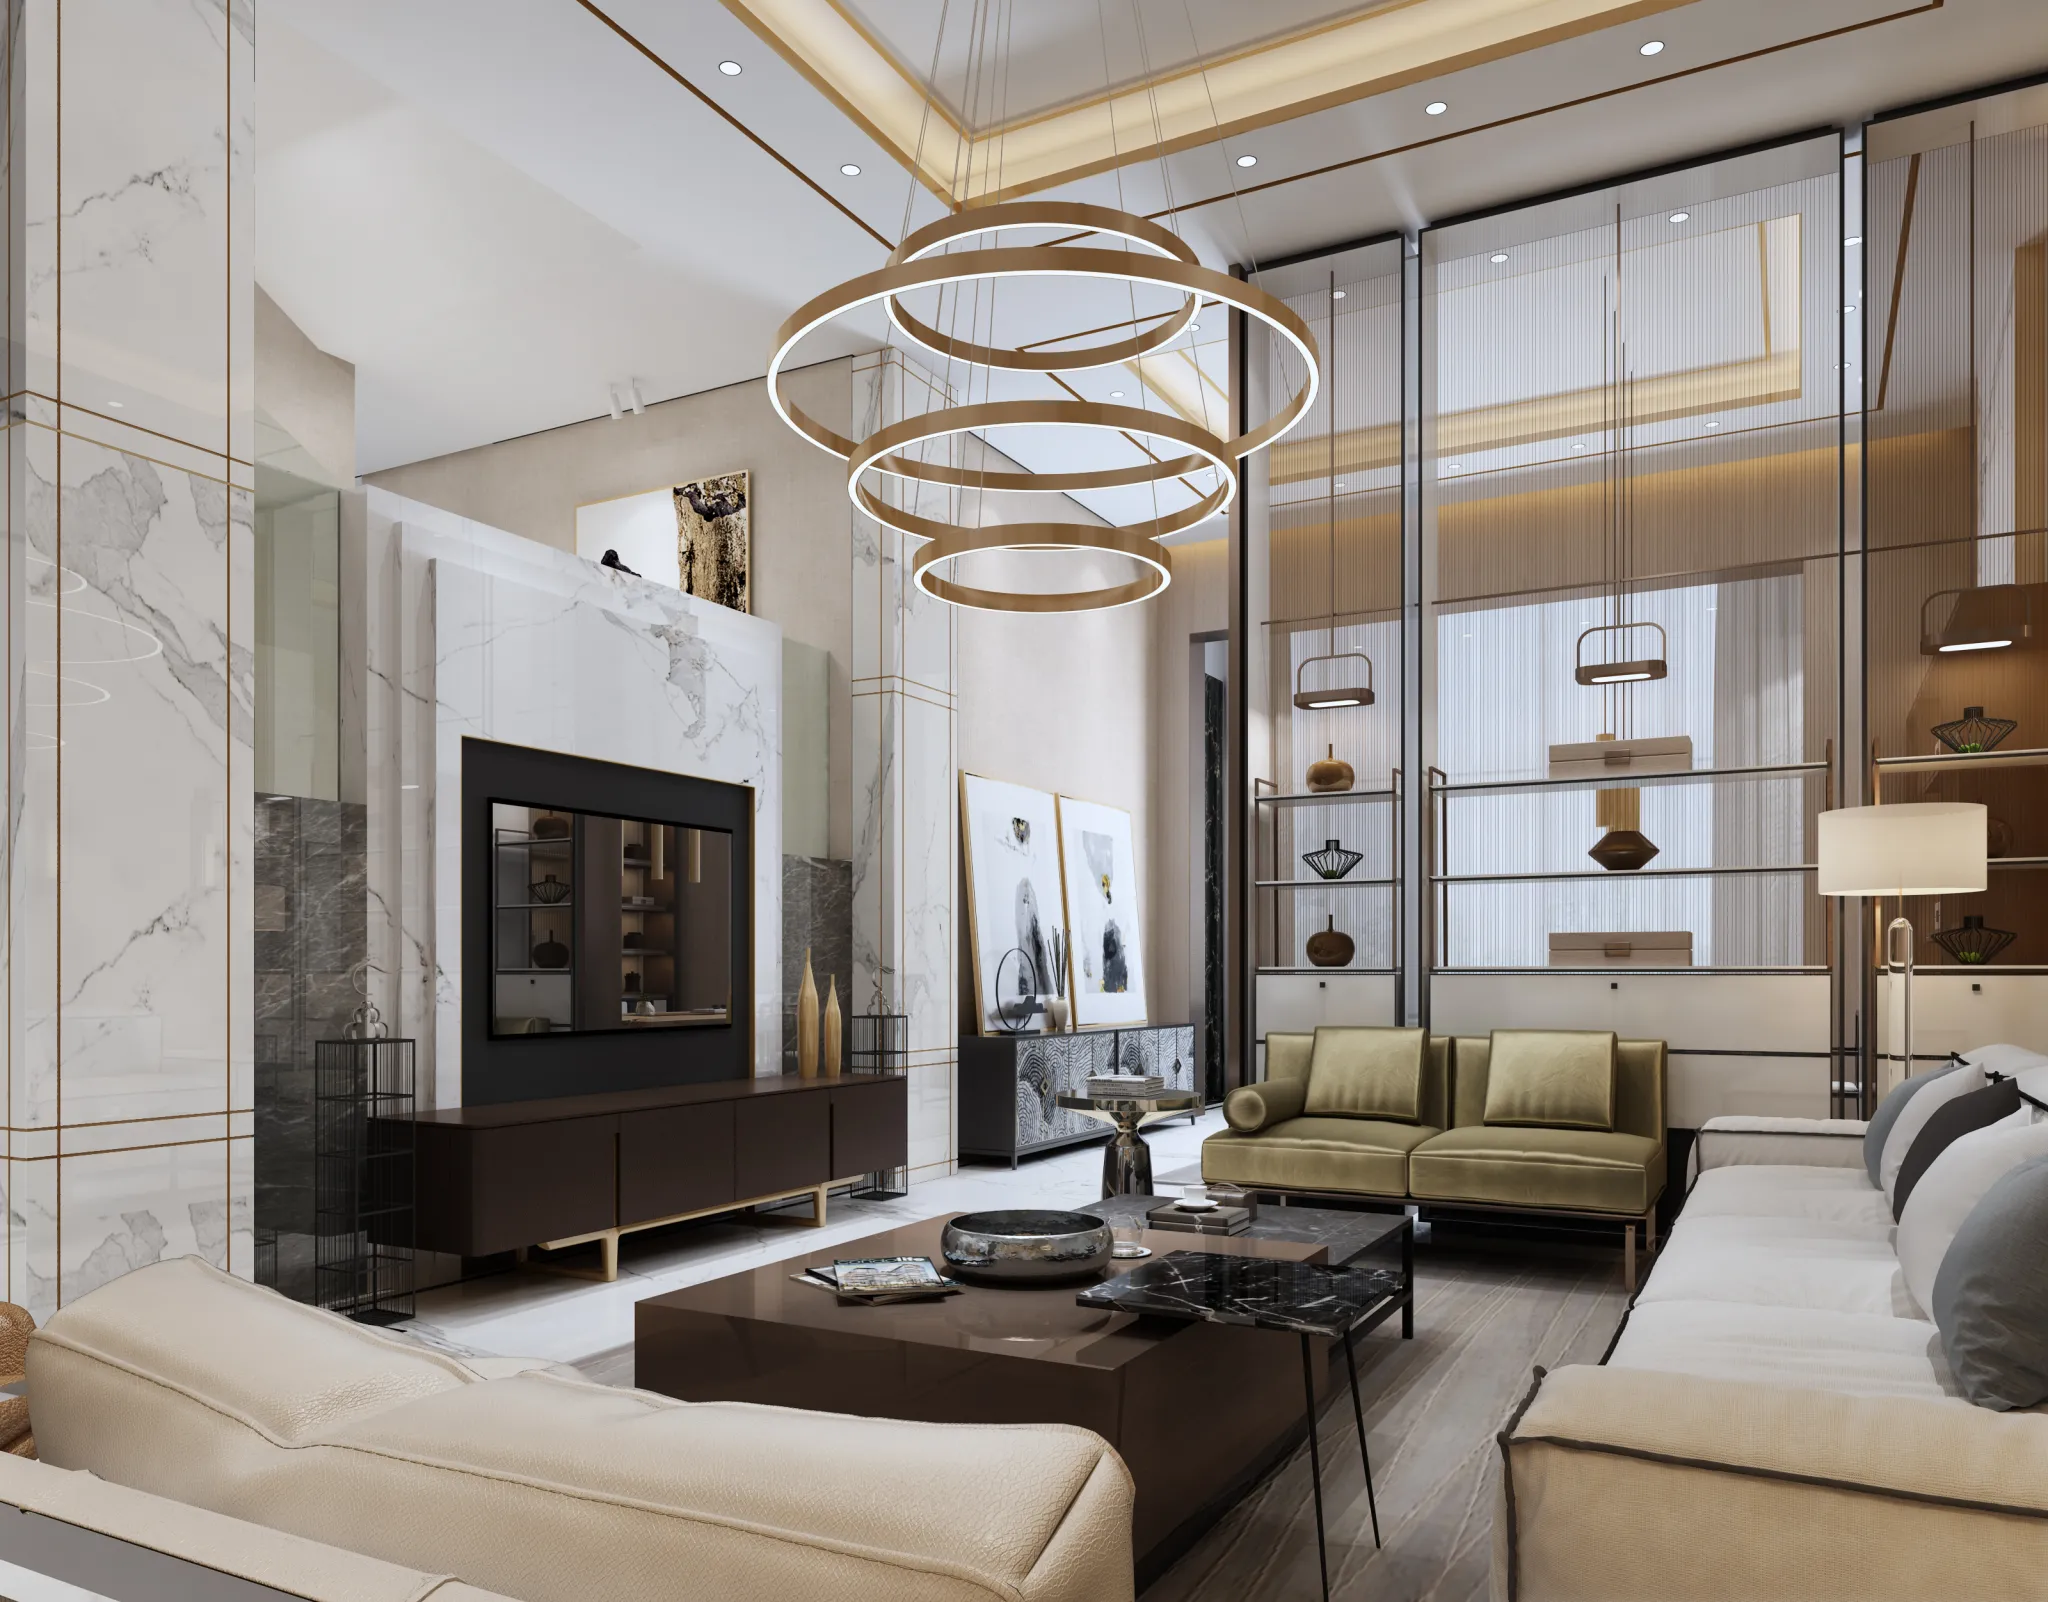 DESMOD INTERIOR 2021 (VRAY) – 4. LIVING ROOM – CHINESE – 006